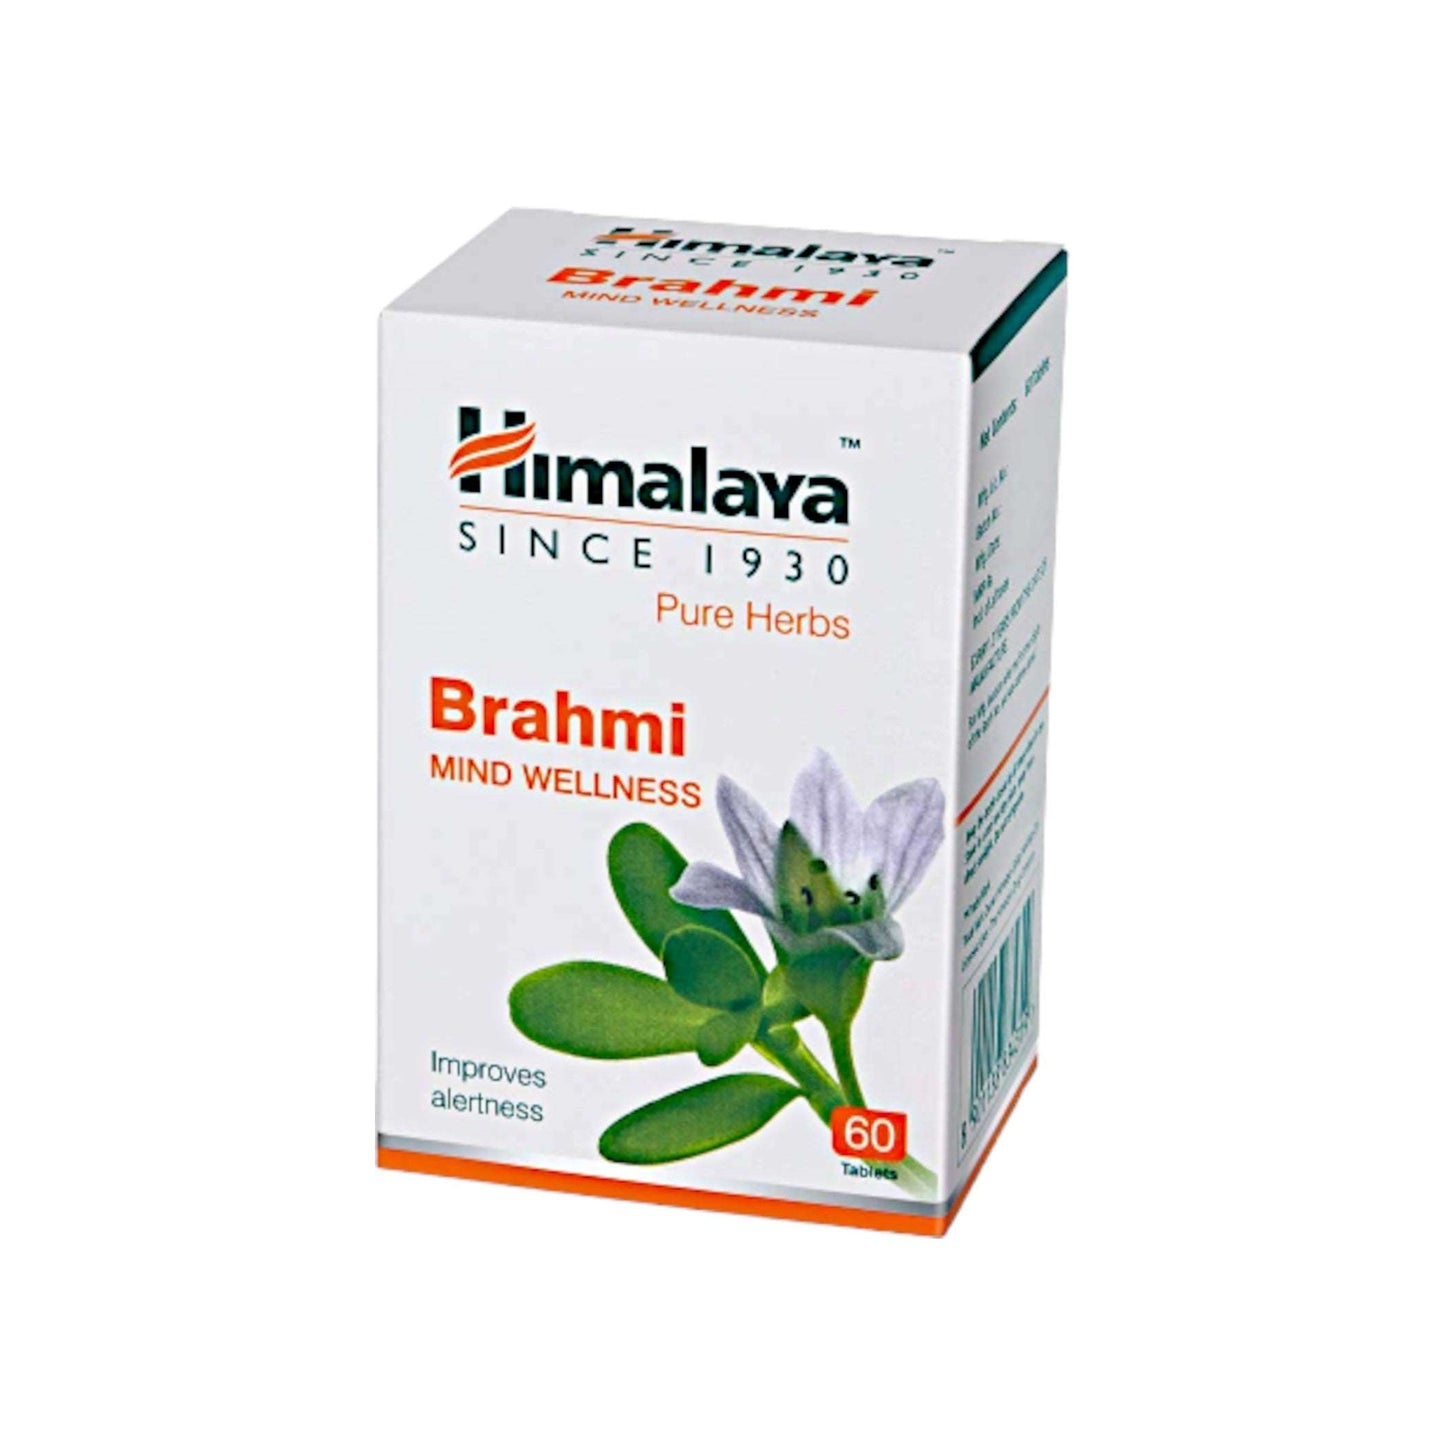 Image: Himalaya Herbals Brahmi 60 Tablets - Brain health and cognitive support with Bacopa Monnieri supplement.